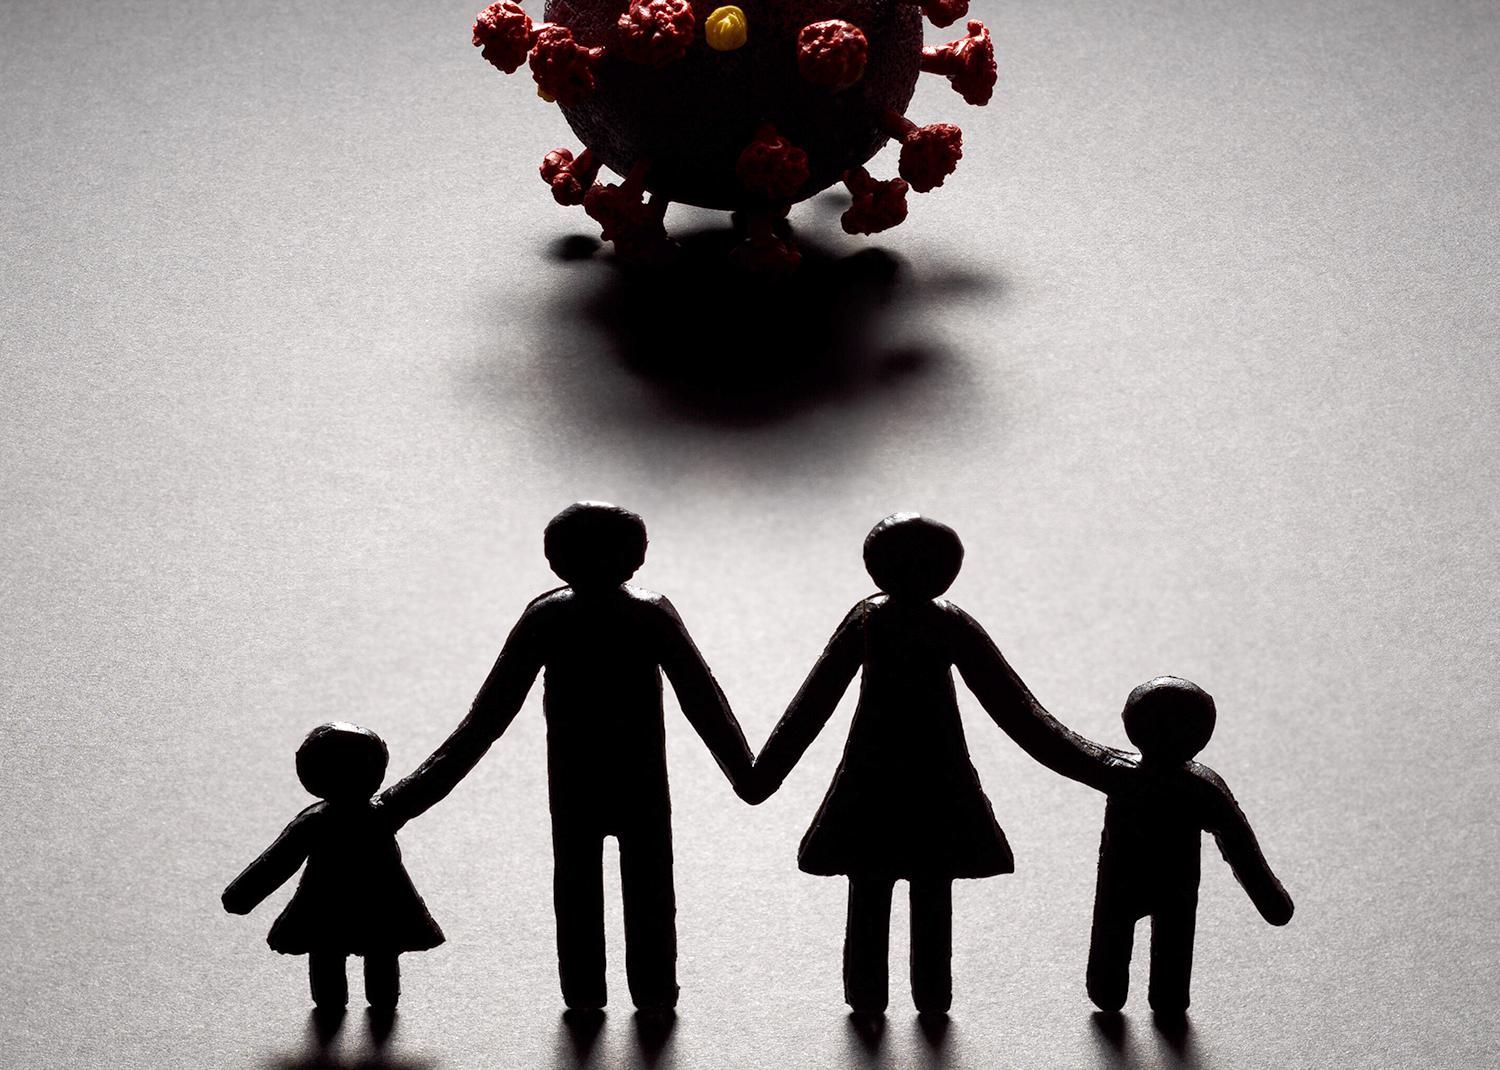 Silhouette of a paper cut-out style family of four facing a three-dimensional model of the novel coronavirus. 